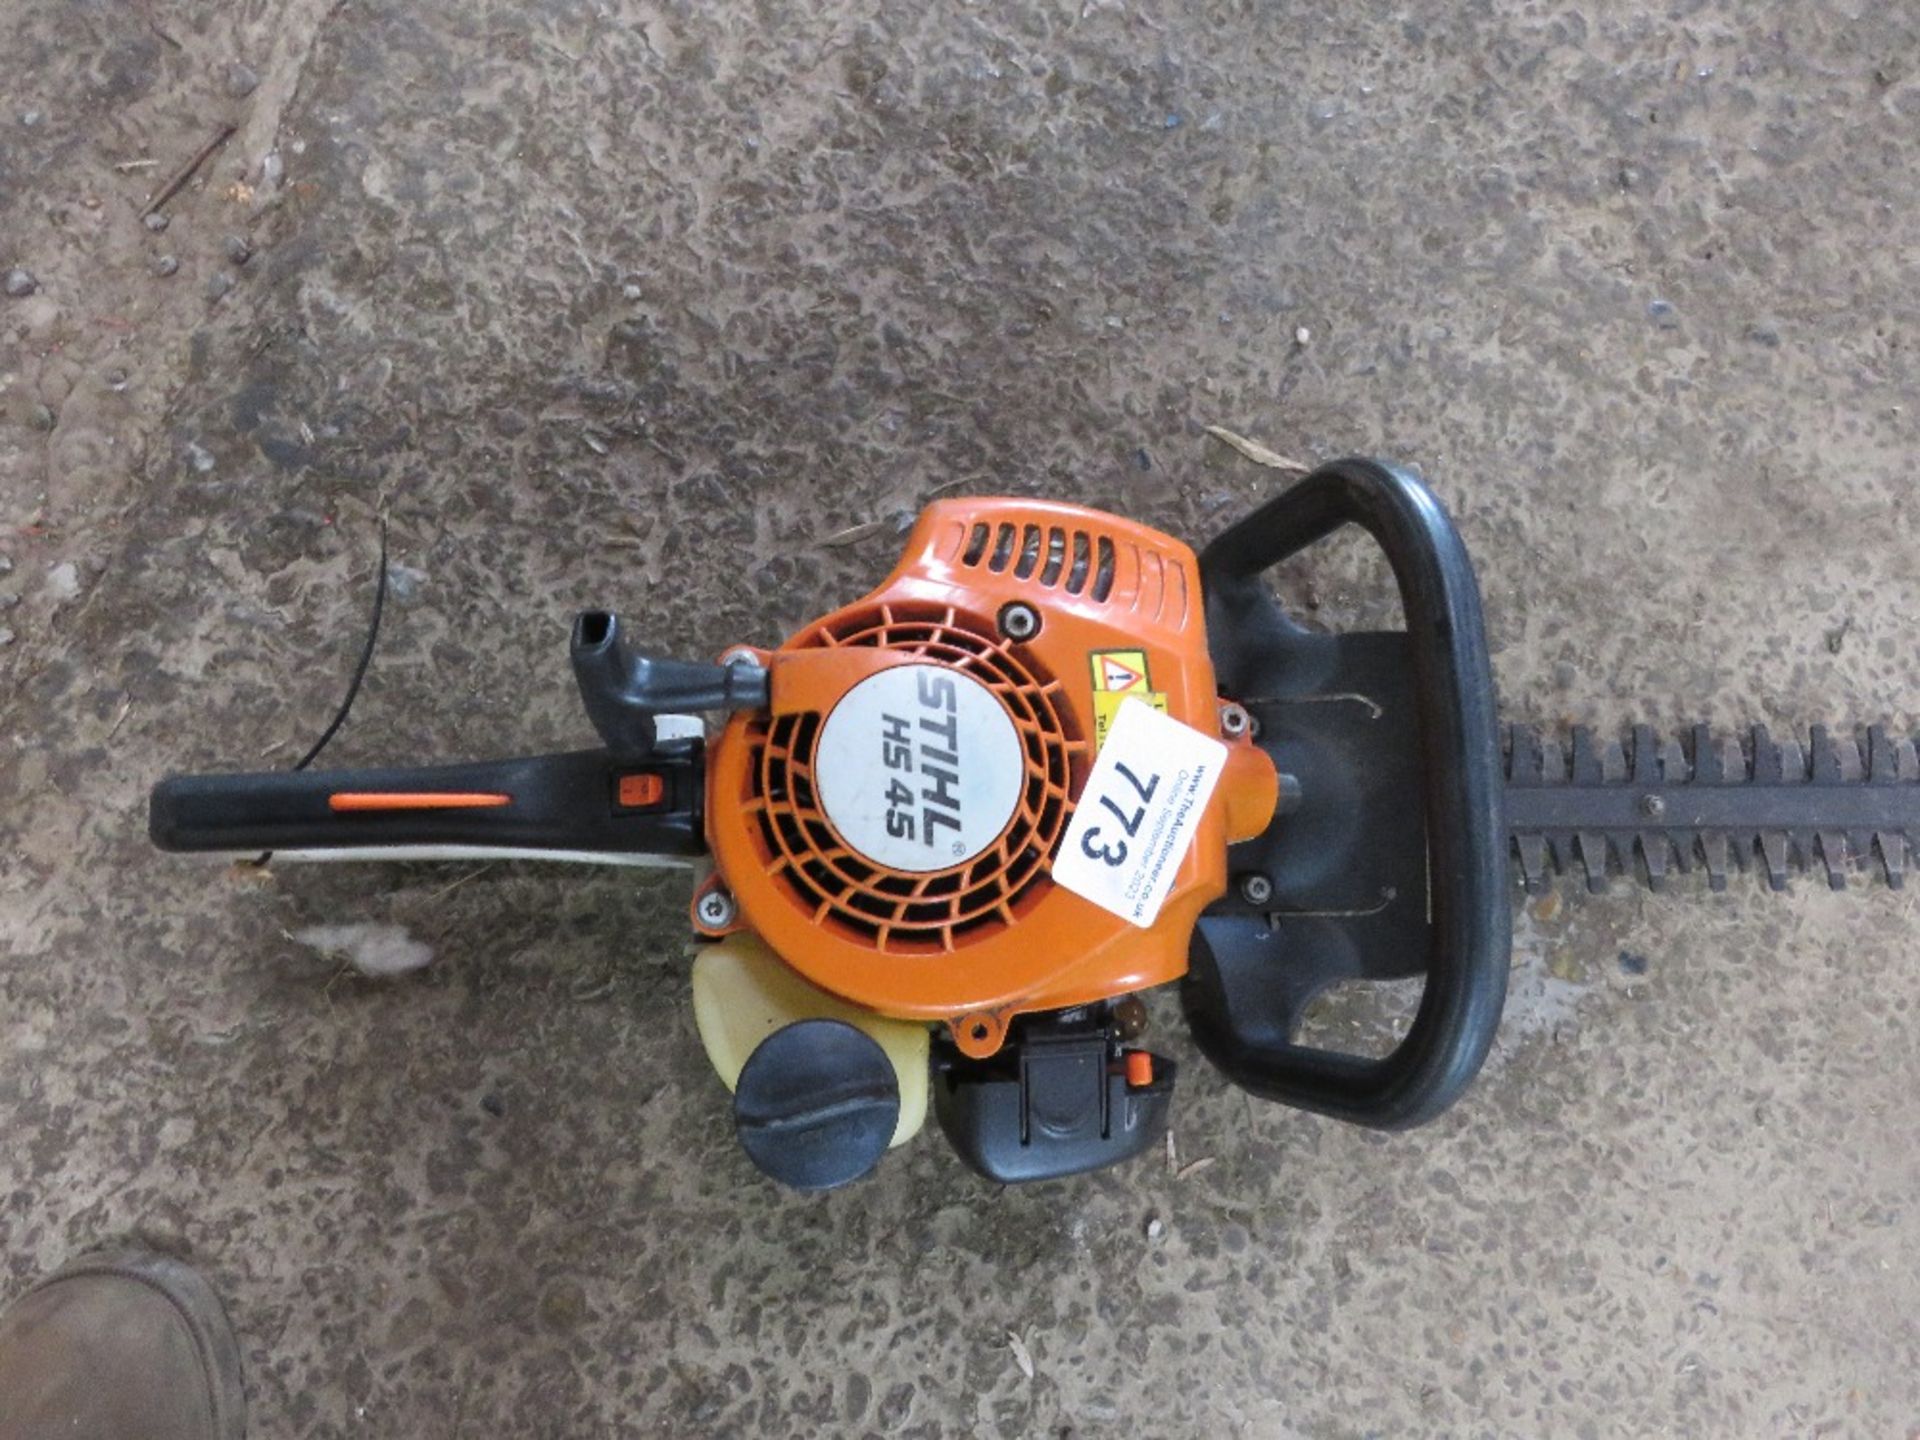 STIHL HS45 PETROL ENGINED HEDGE CUTTER. THIS LOT IS SOLD UNDER THE AUCTIONEERS MARGIN SCHEME, THE - Image 2 of 4